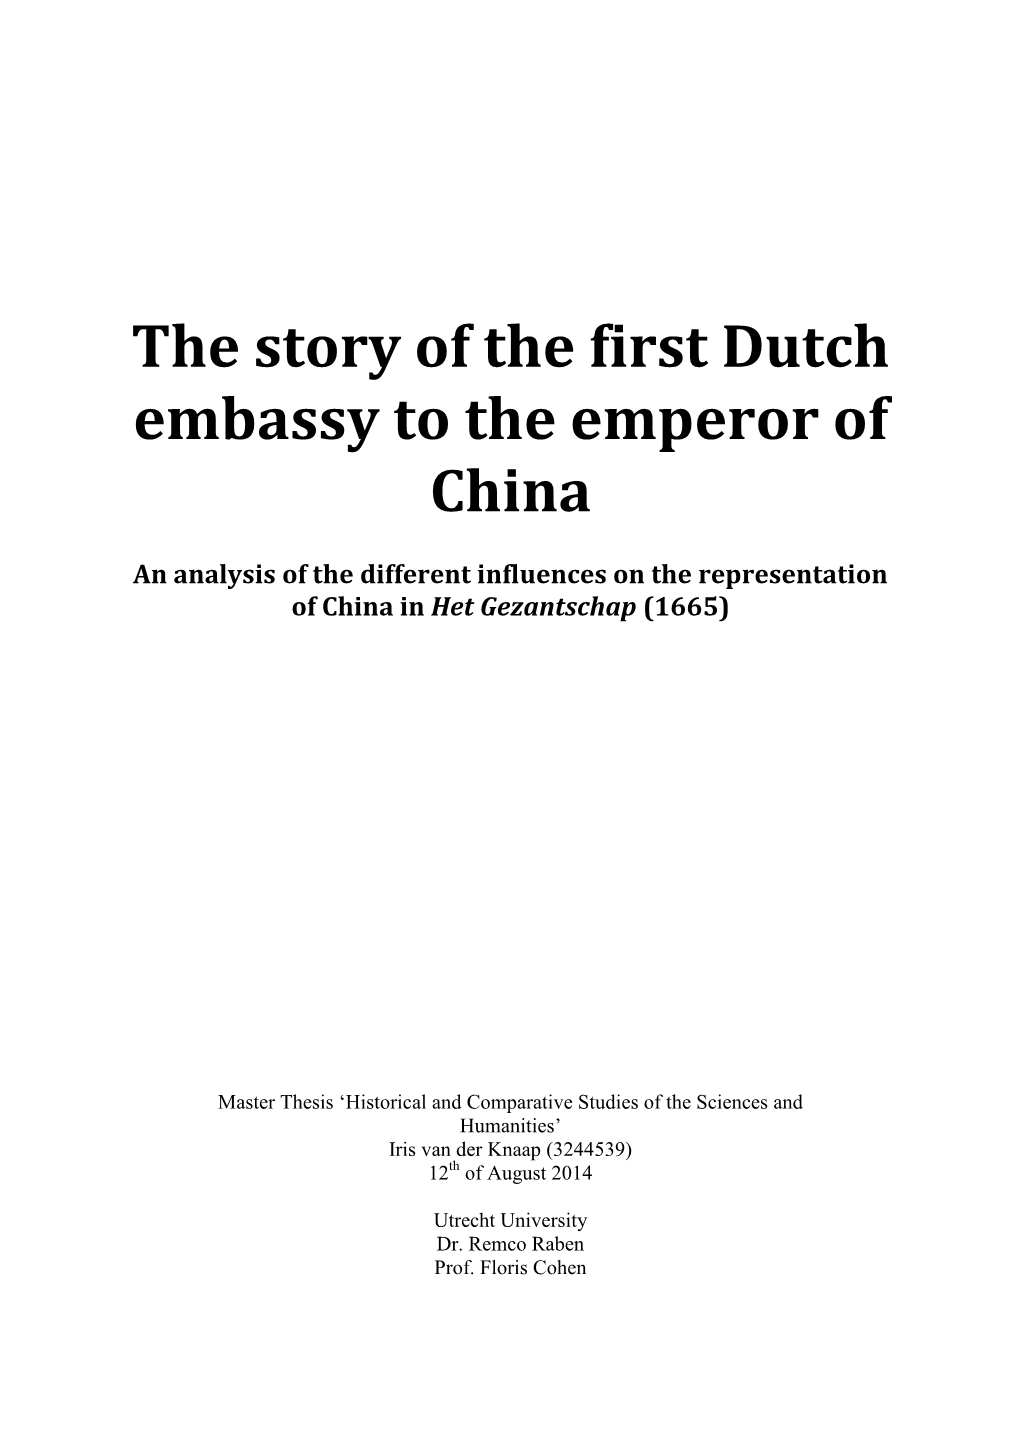 The Story of the First Dutch Embassy to the Emperor of China